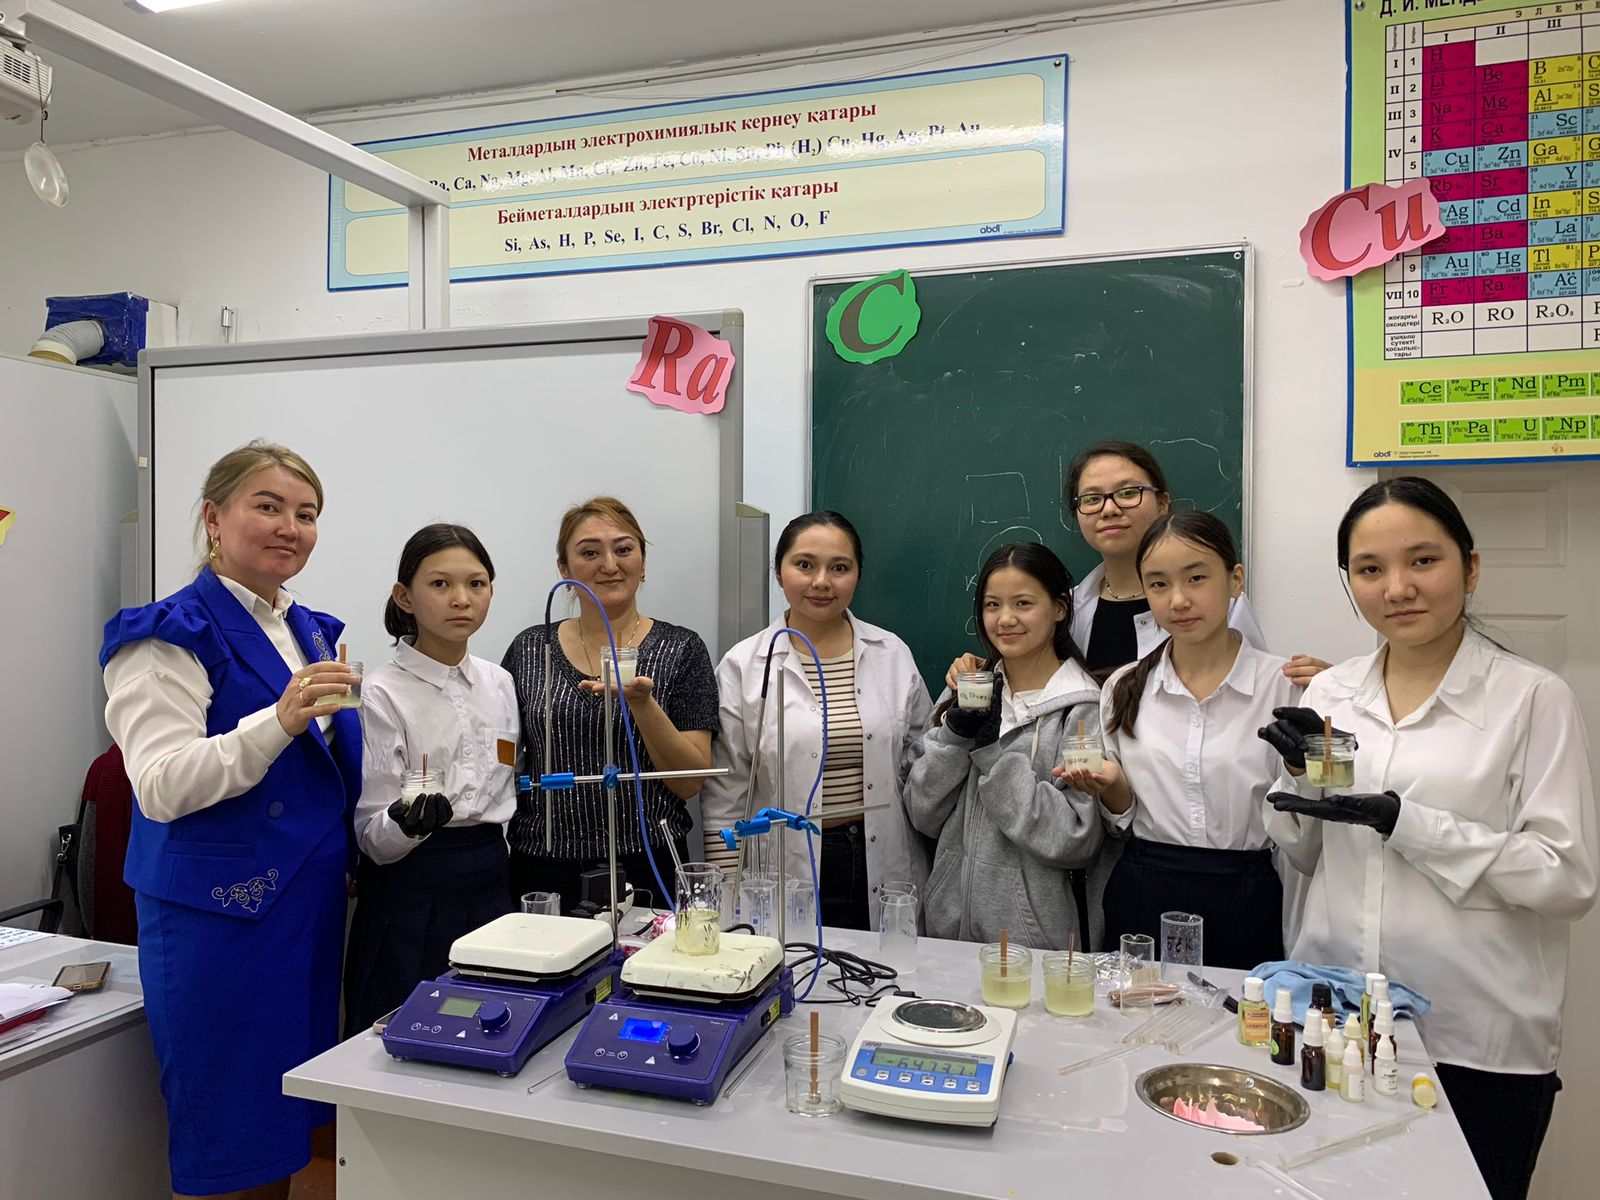 Increasing the capacity of school students to perform laboratory work in chemistry